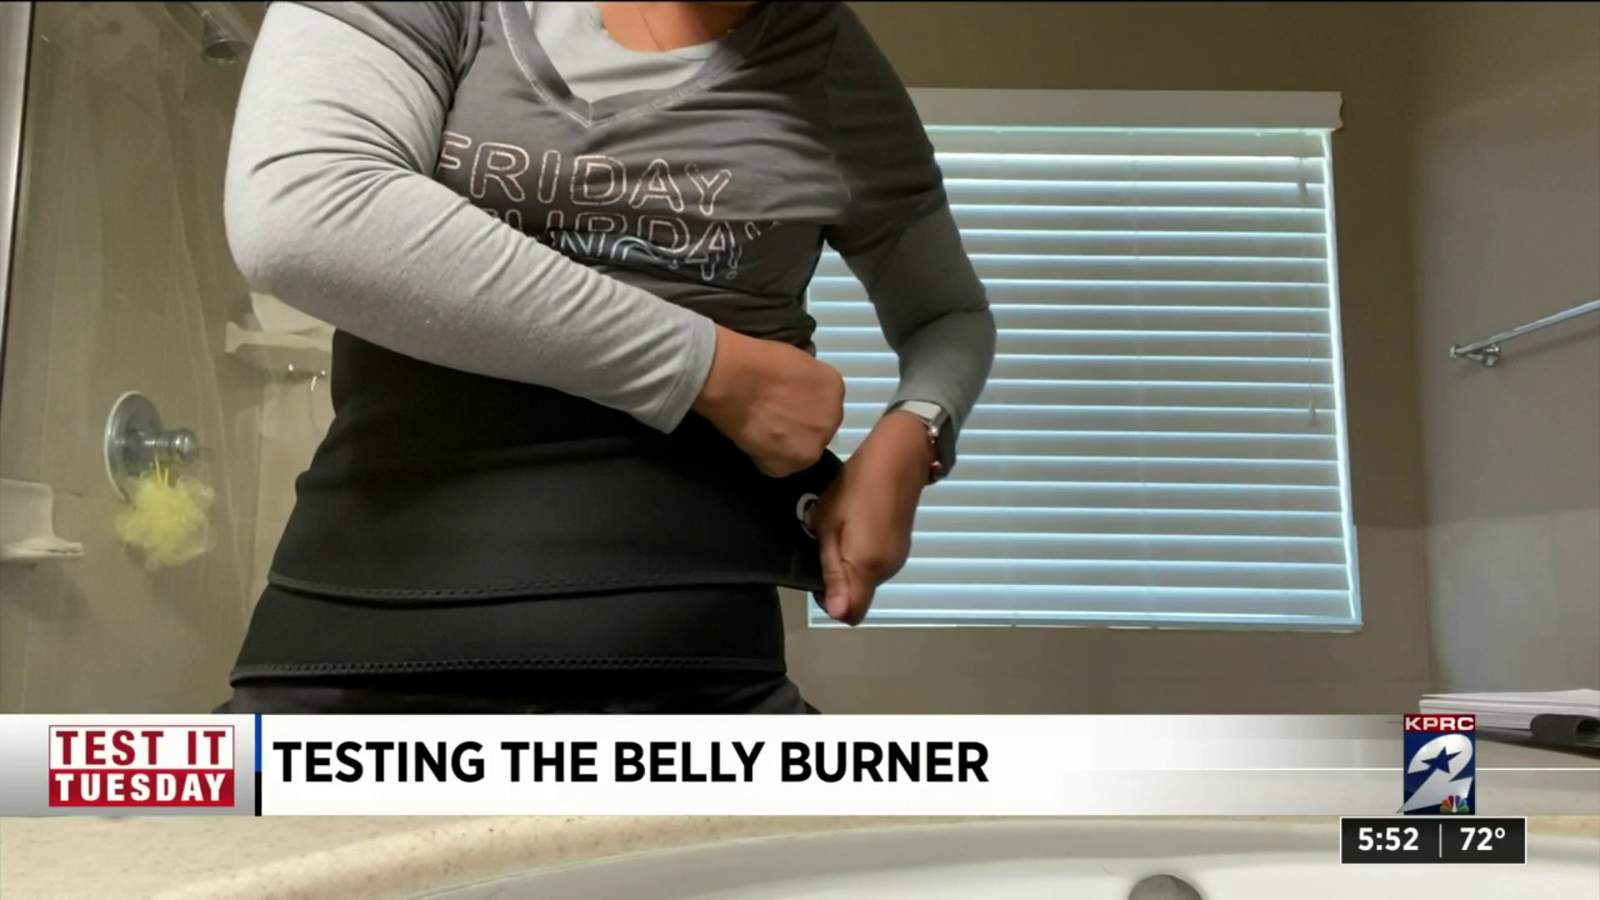 Test it Tuesday: Can this Belly Burner help you lose belly fat faster by wearing it?